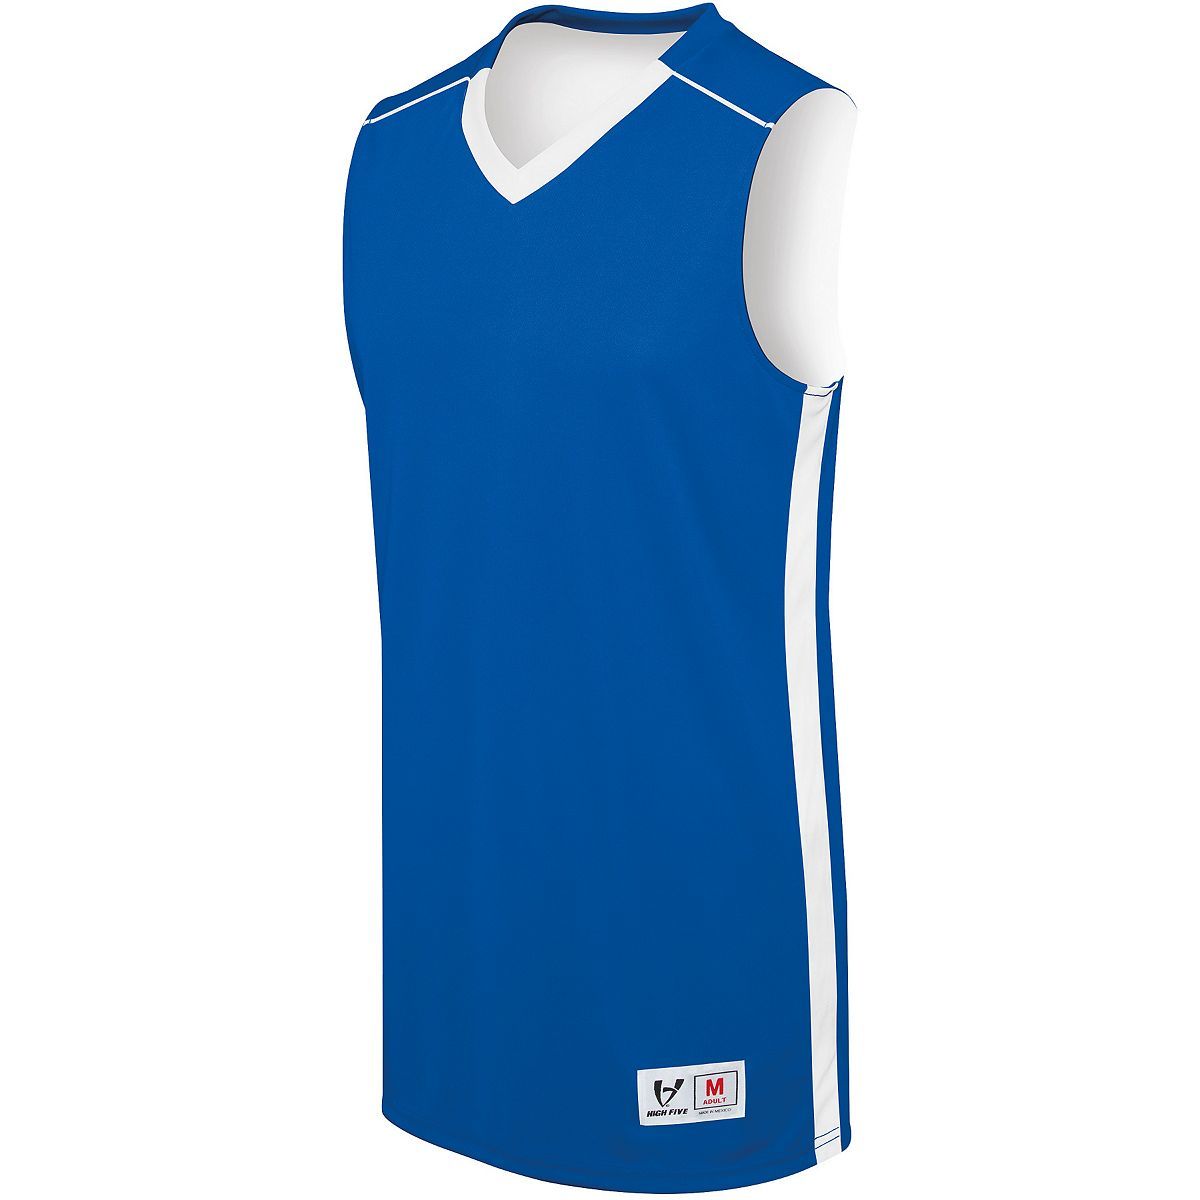 Augusta Sportswear Ladies Competition Reversible Jersey in Royal/White  -Part of the Ladies, Ladies-Jersey, Augusta-Products, Basketball, Shirts, All-Sports, All-Sports-1 product lines at KanaleyCreations.com